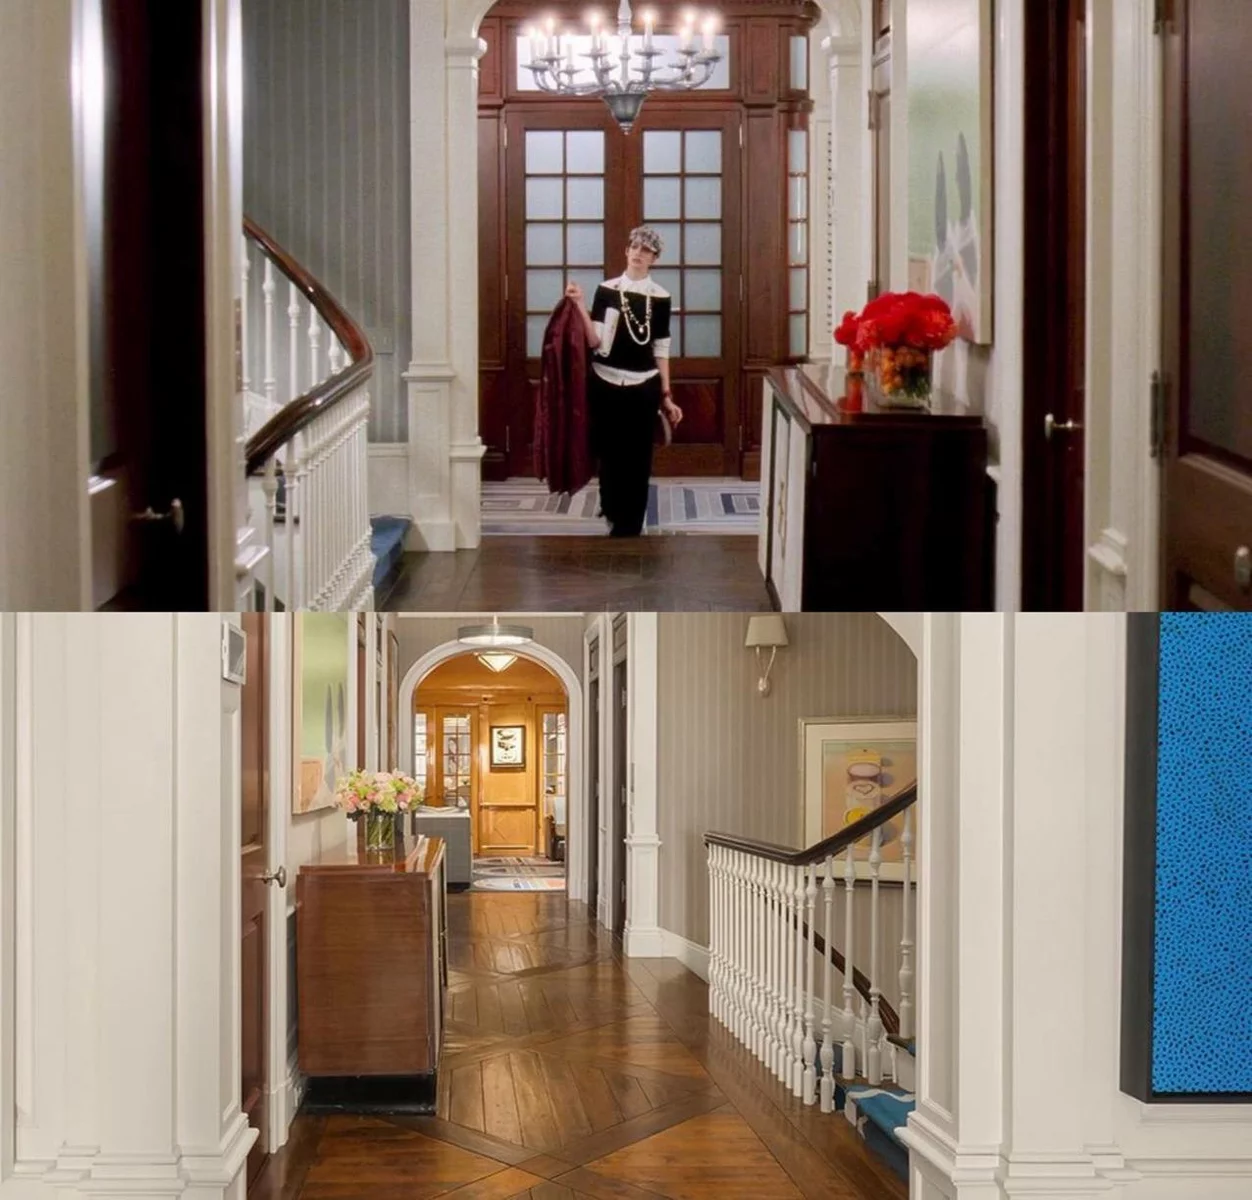 a parallel between a scene from the movie &ldquo;The Devil Wears Prada&rdquo; and a real-life interior in a house